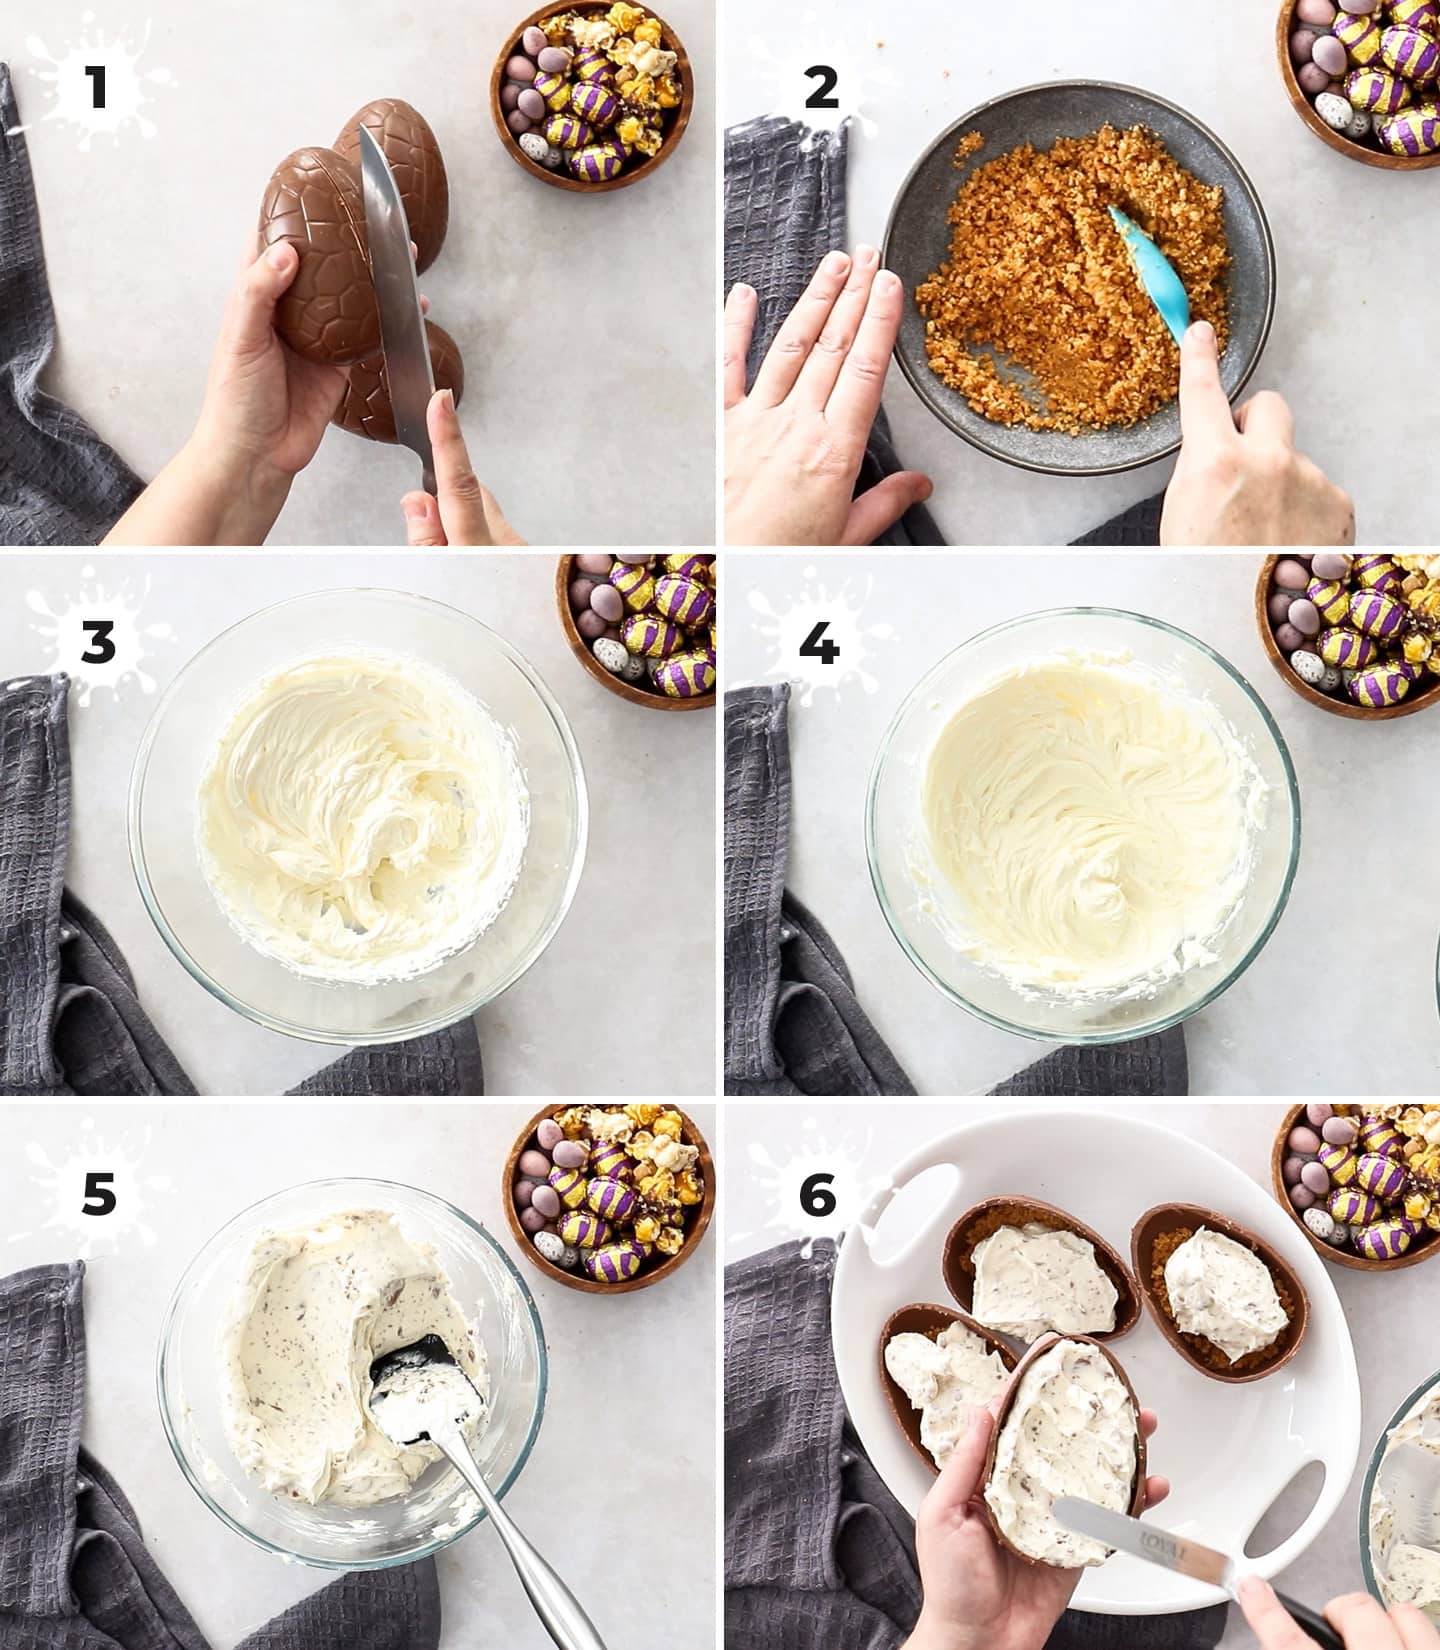 A collage of 6 images showing how to make Easter egg cheesecake.